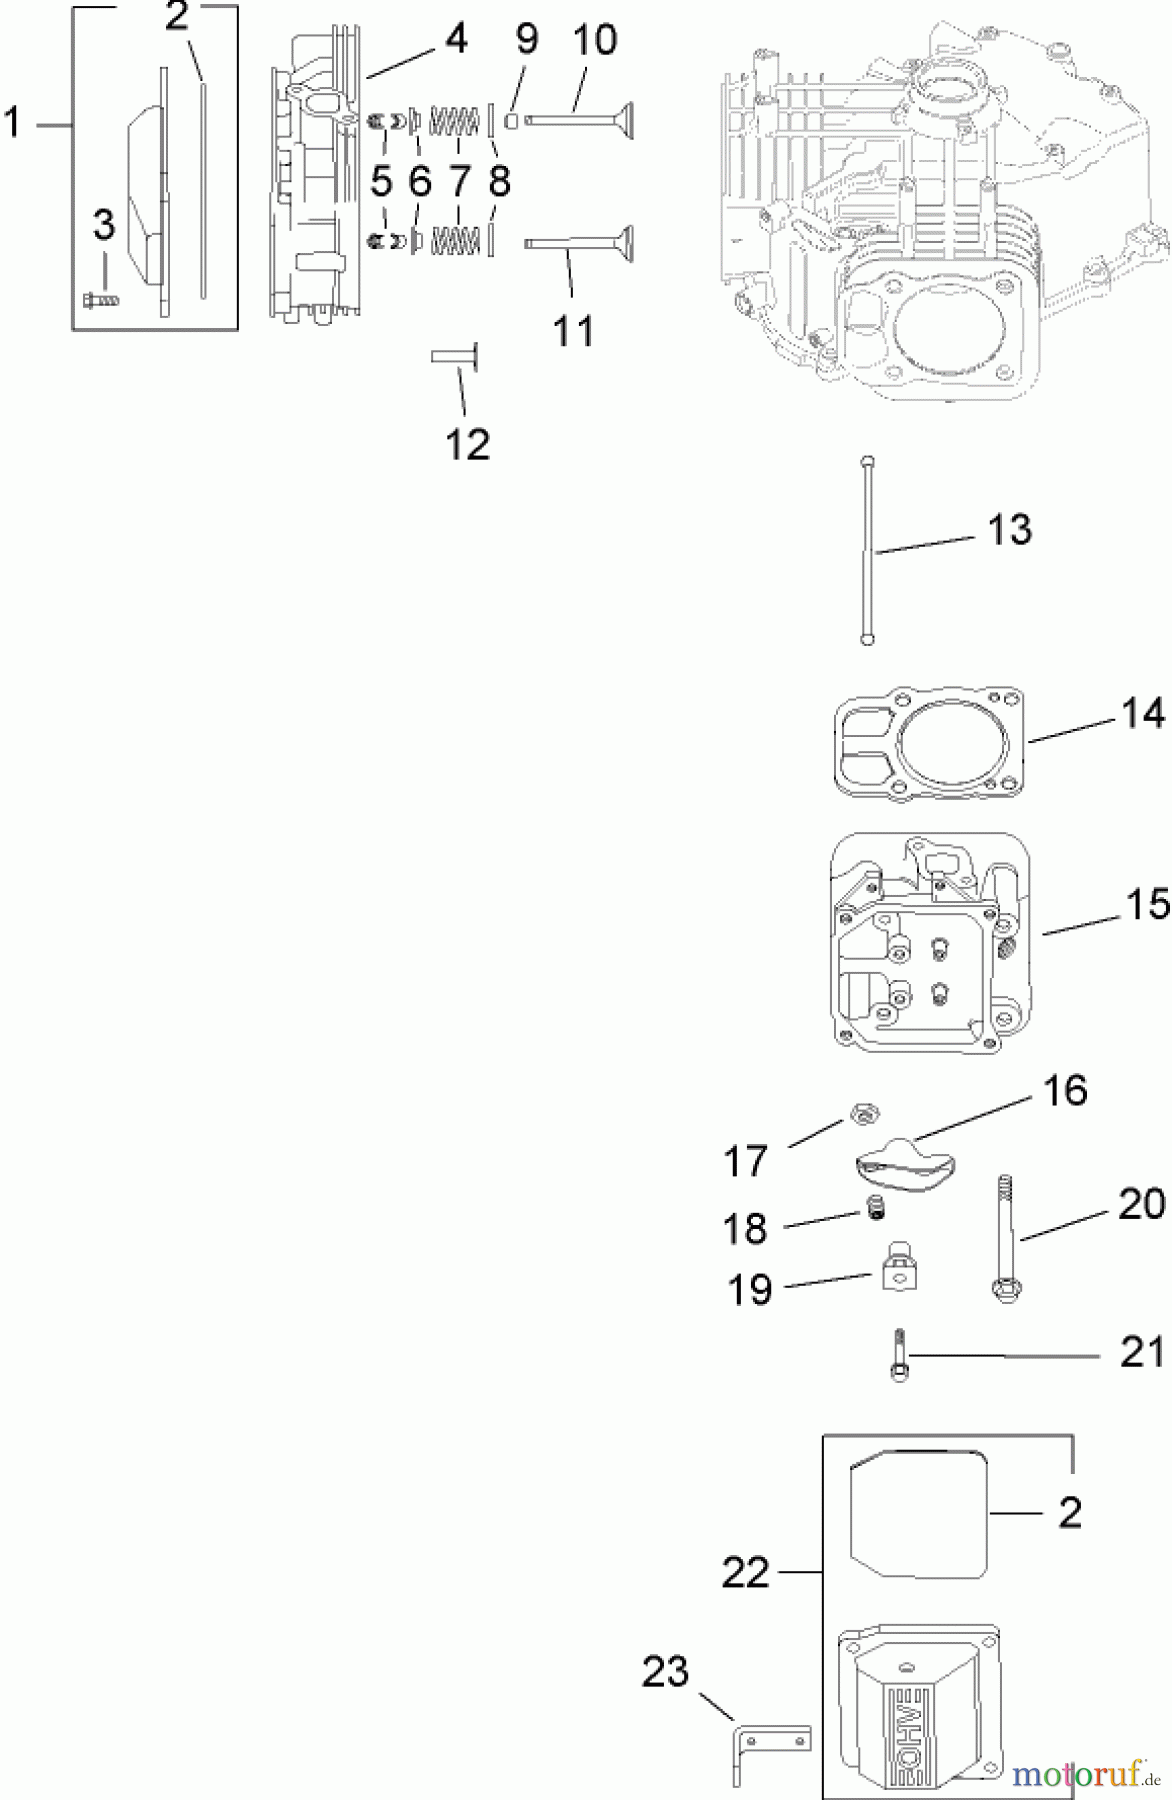  Toro Neu Mowers, Lawn & Garden Tractor Seite 1 13AP60RP744 (LX500) - Toro LX500 Lawn Tractor, 2006 (1A096B50000-) HEAD, VALVE AND BREATHER ASSEMBLY KOHLER SV720-0011